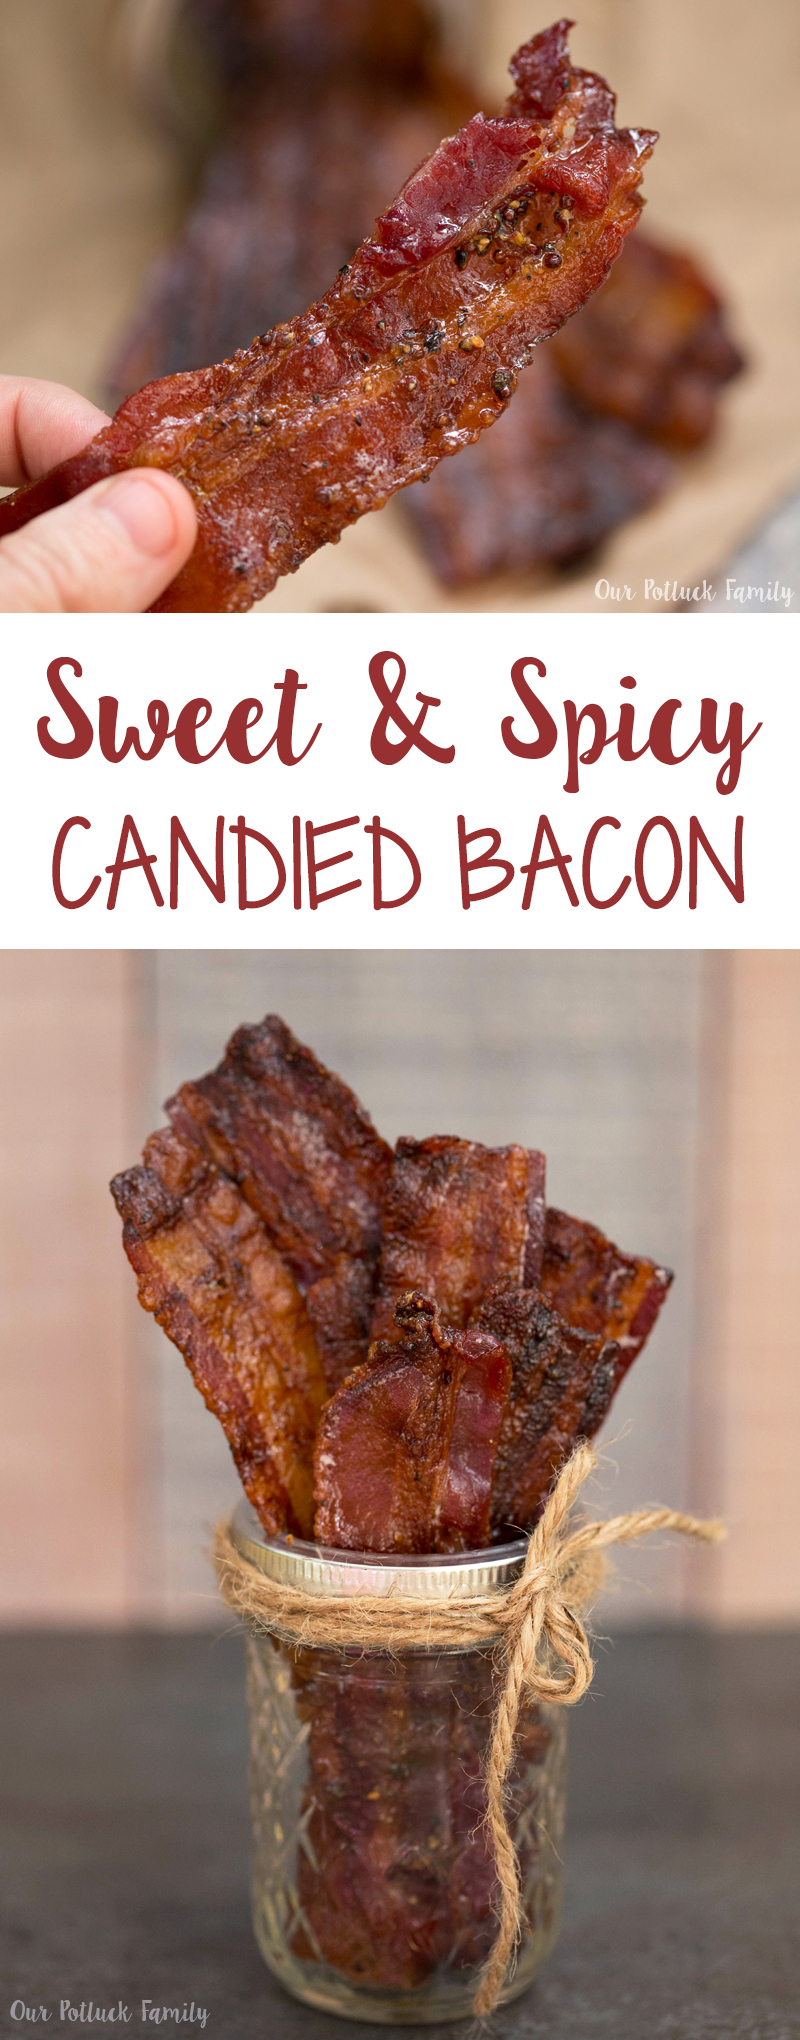 sweet spicy candied bacon